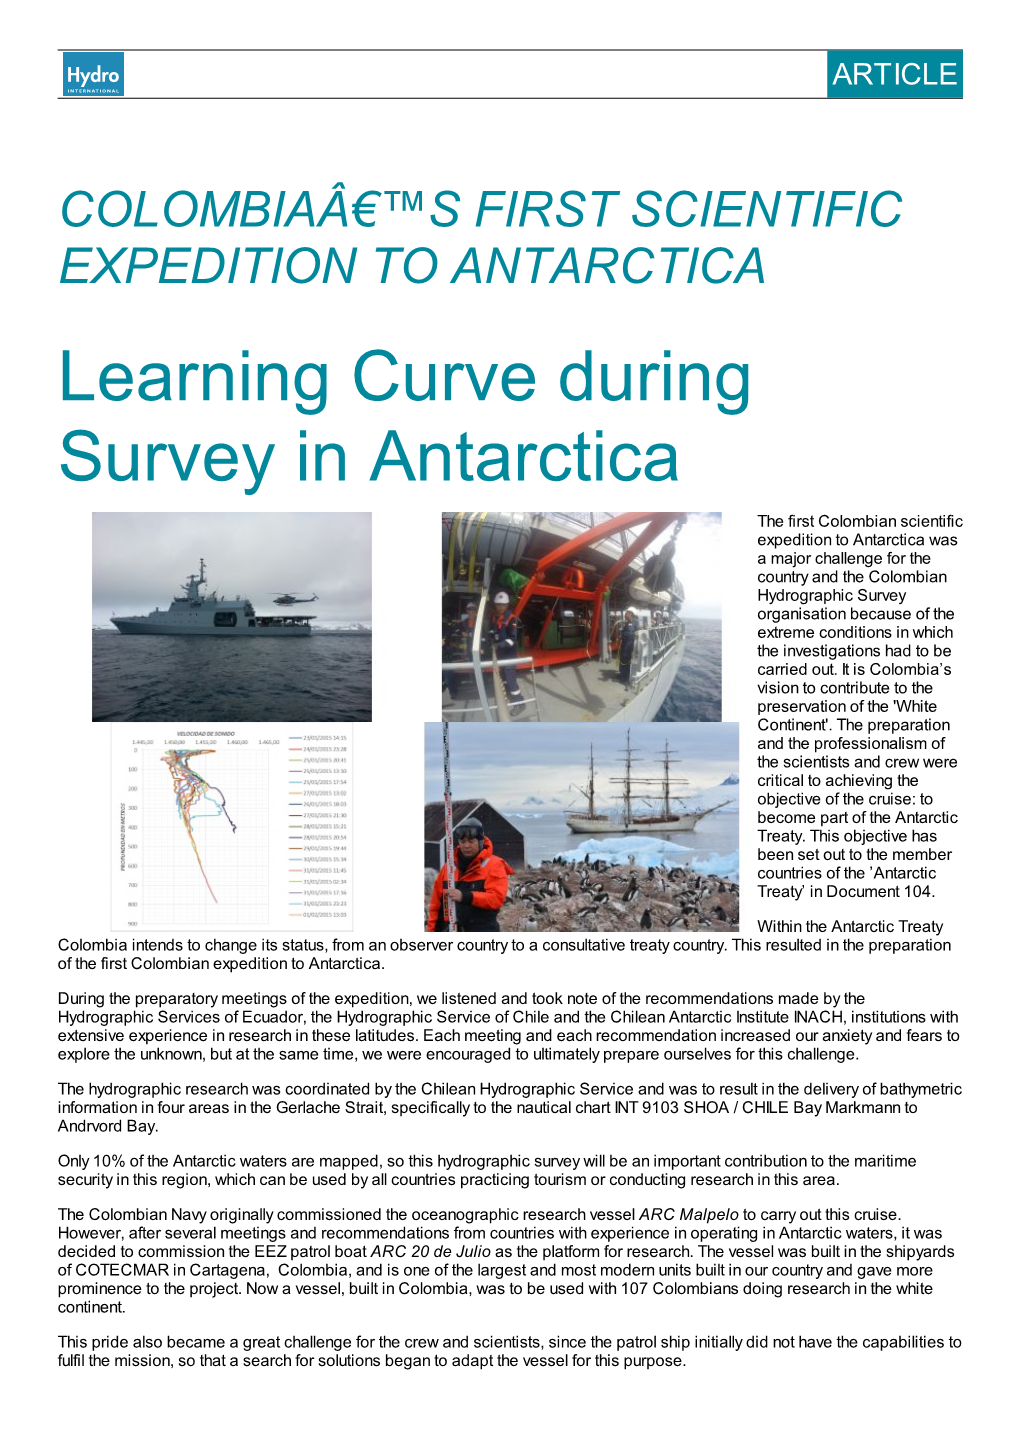 Learning Curve During Survey in Antarctica